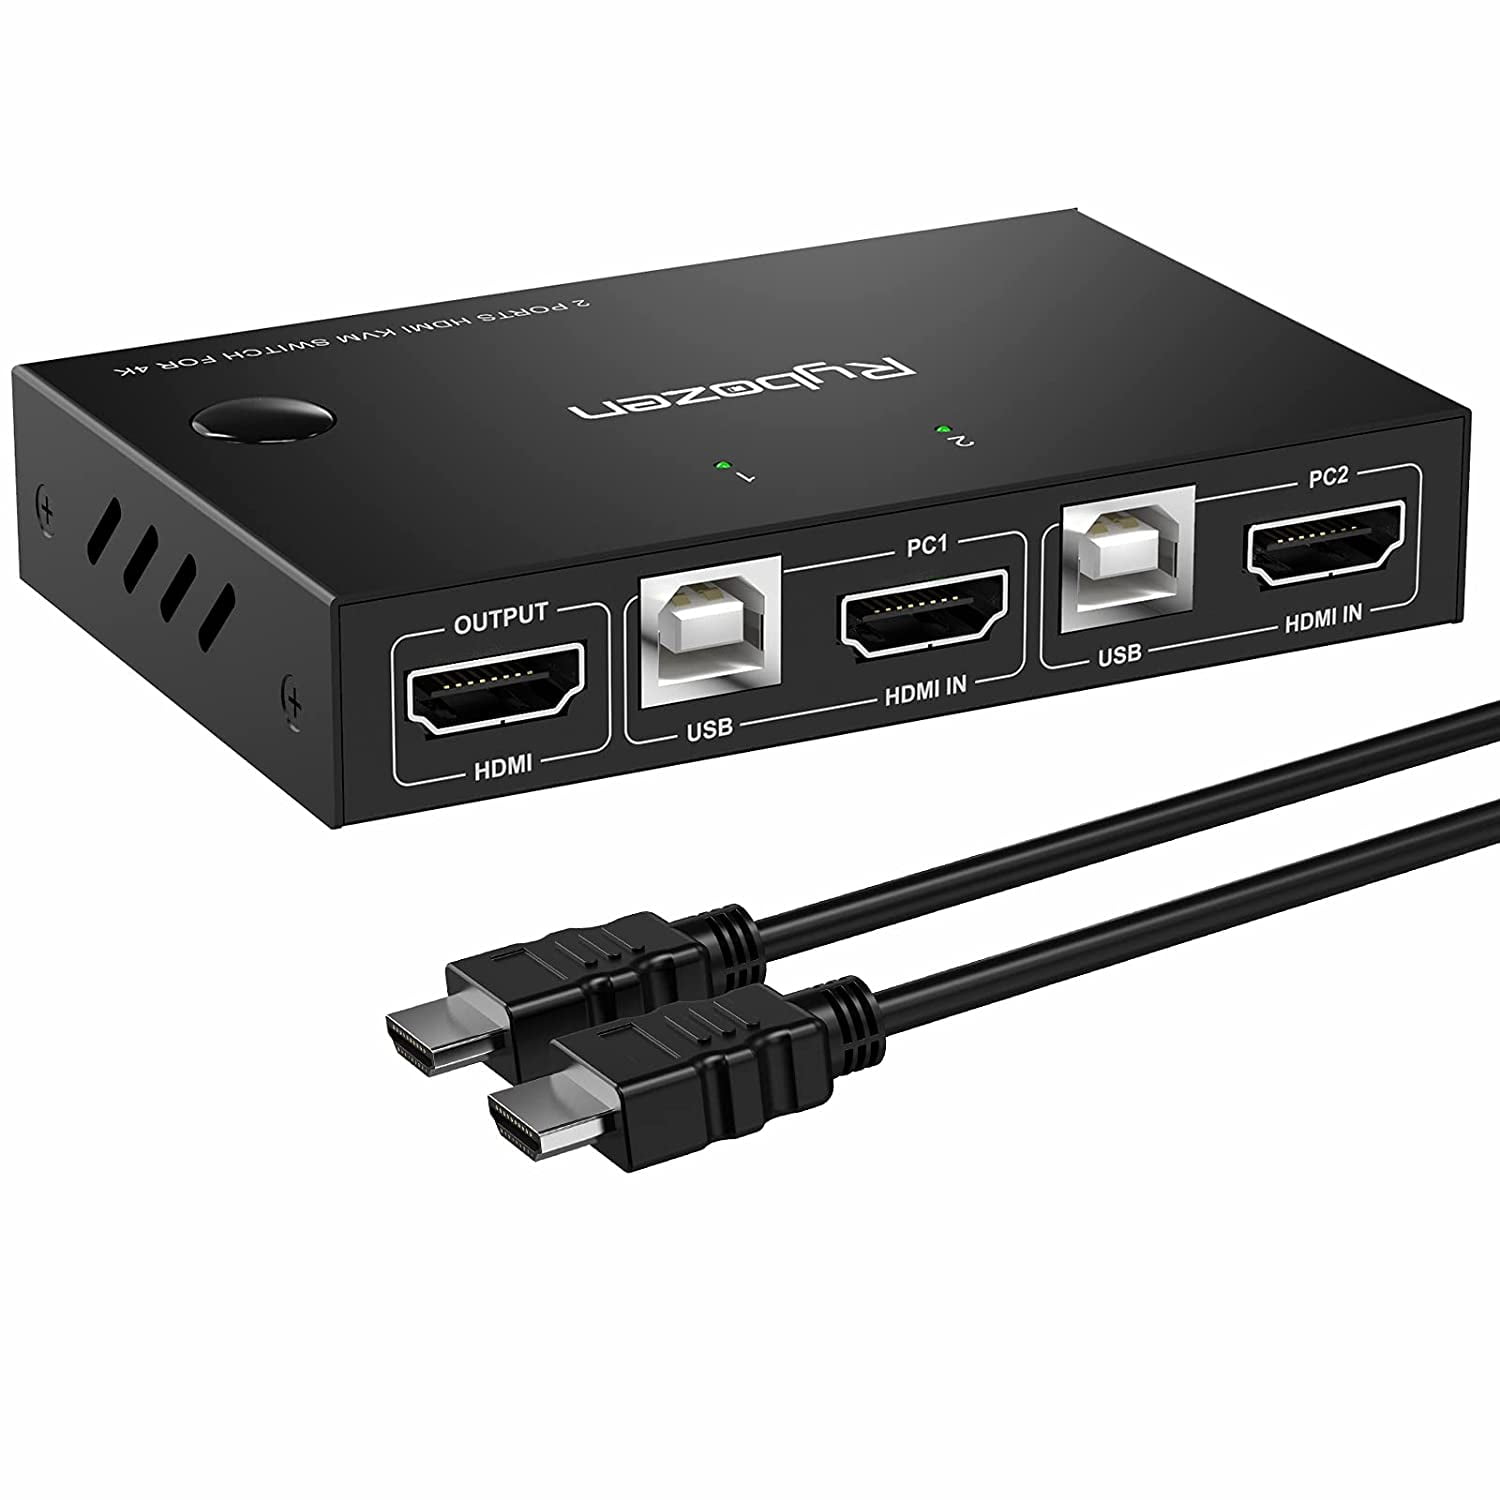 KVM Switch HDMI 2 Port Box, Rybozen USB and HDMI for 2 Computers Share Keyboard Mouse and HD Monitor,HUD 4K (3840x2160),Support Hotkey Switch and One Button Swapping - Walmart.com